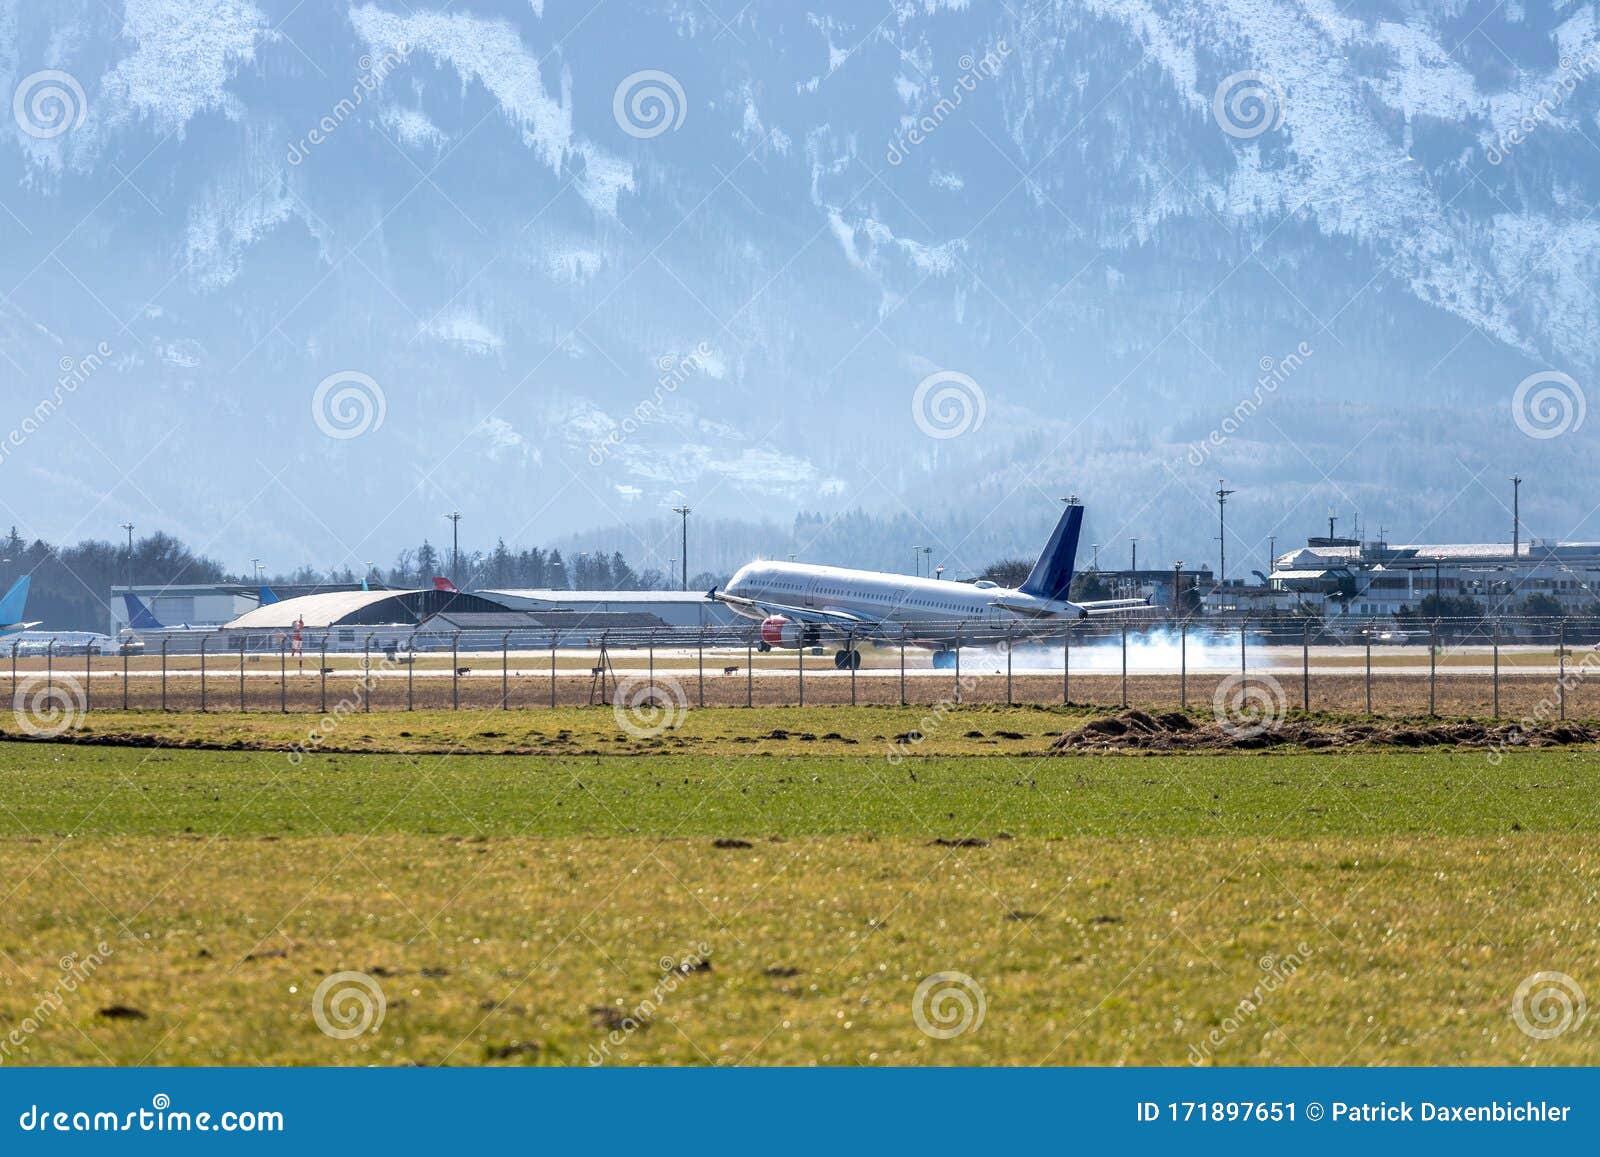 airplane arrival at the airport. travel by air, transportation